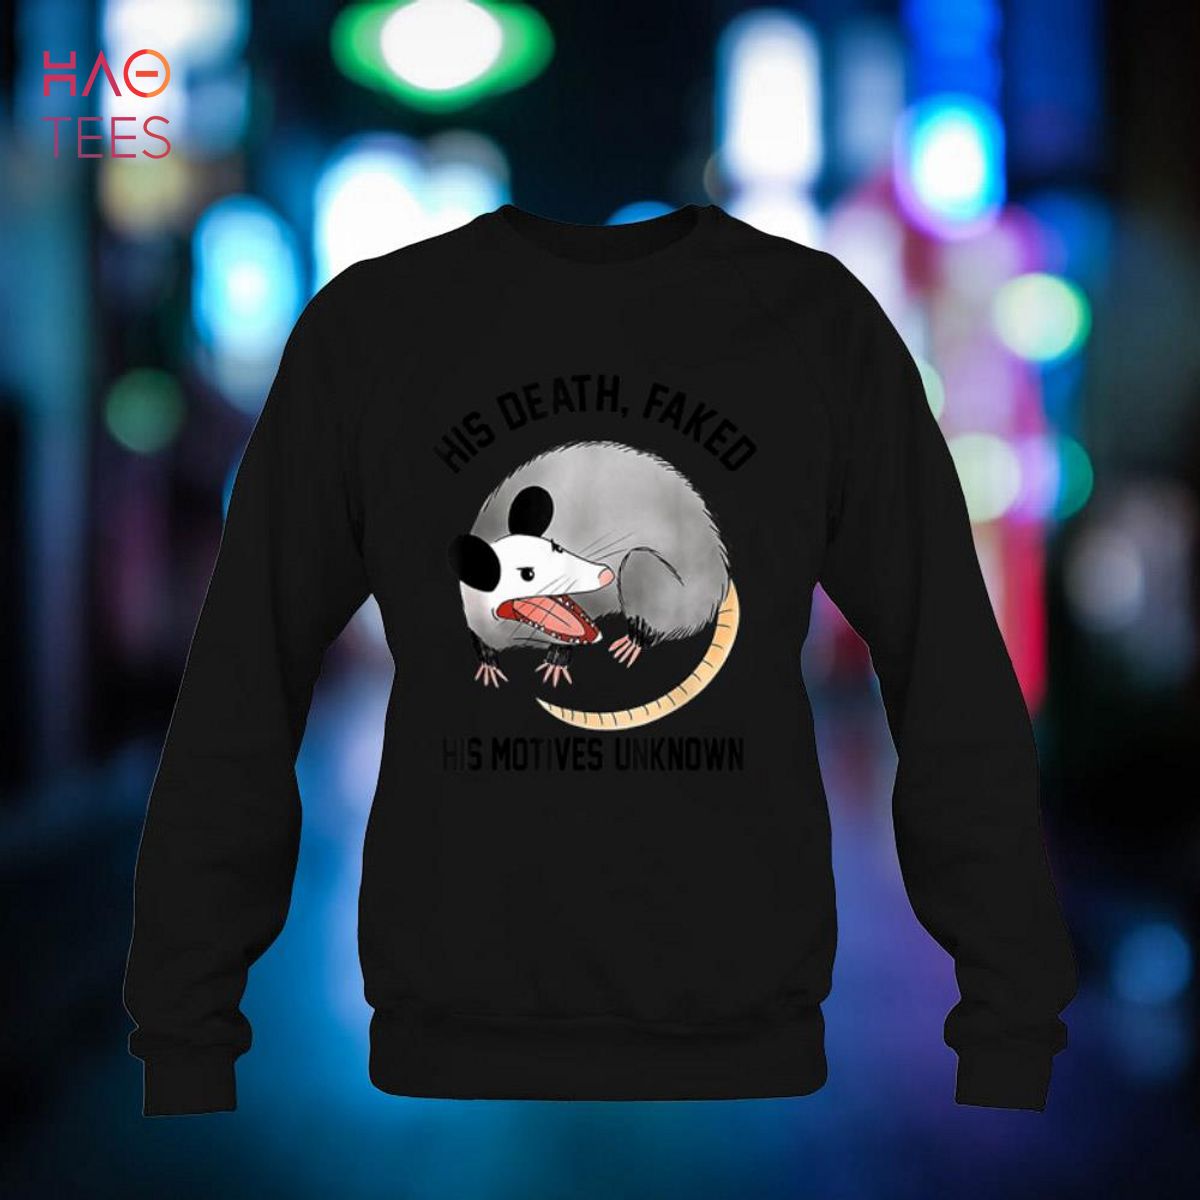 His Death, Faked His Motives, Unknown - Funny Possum Shirt